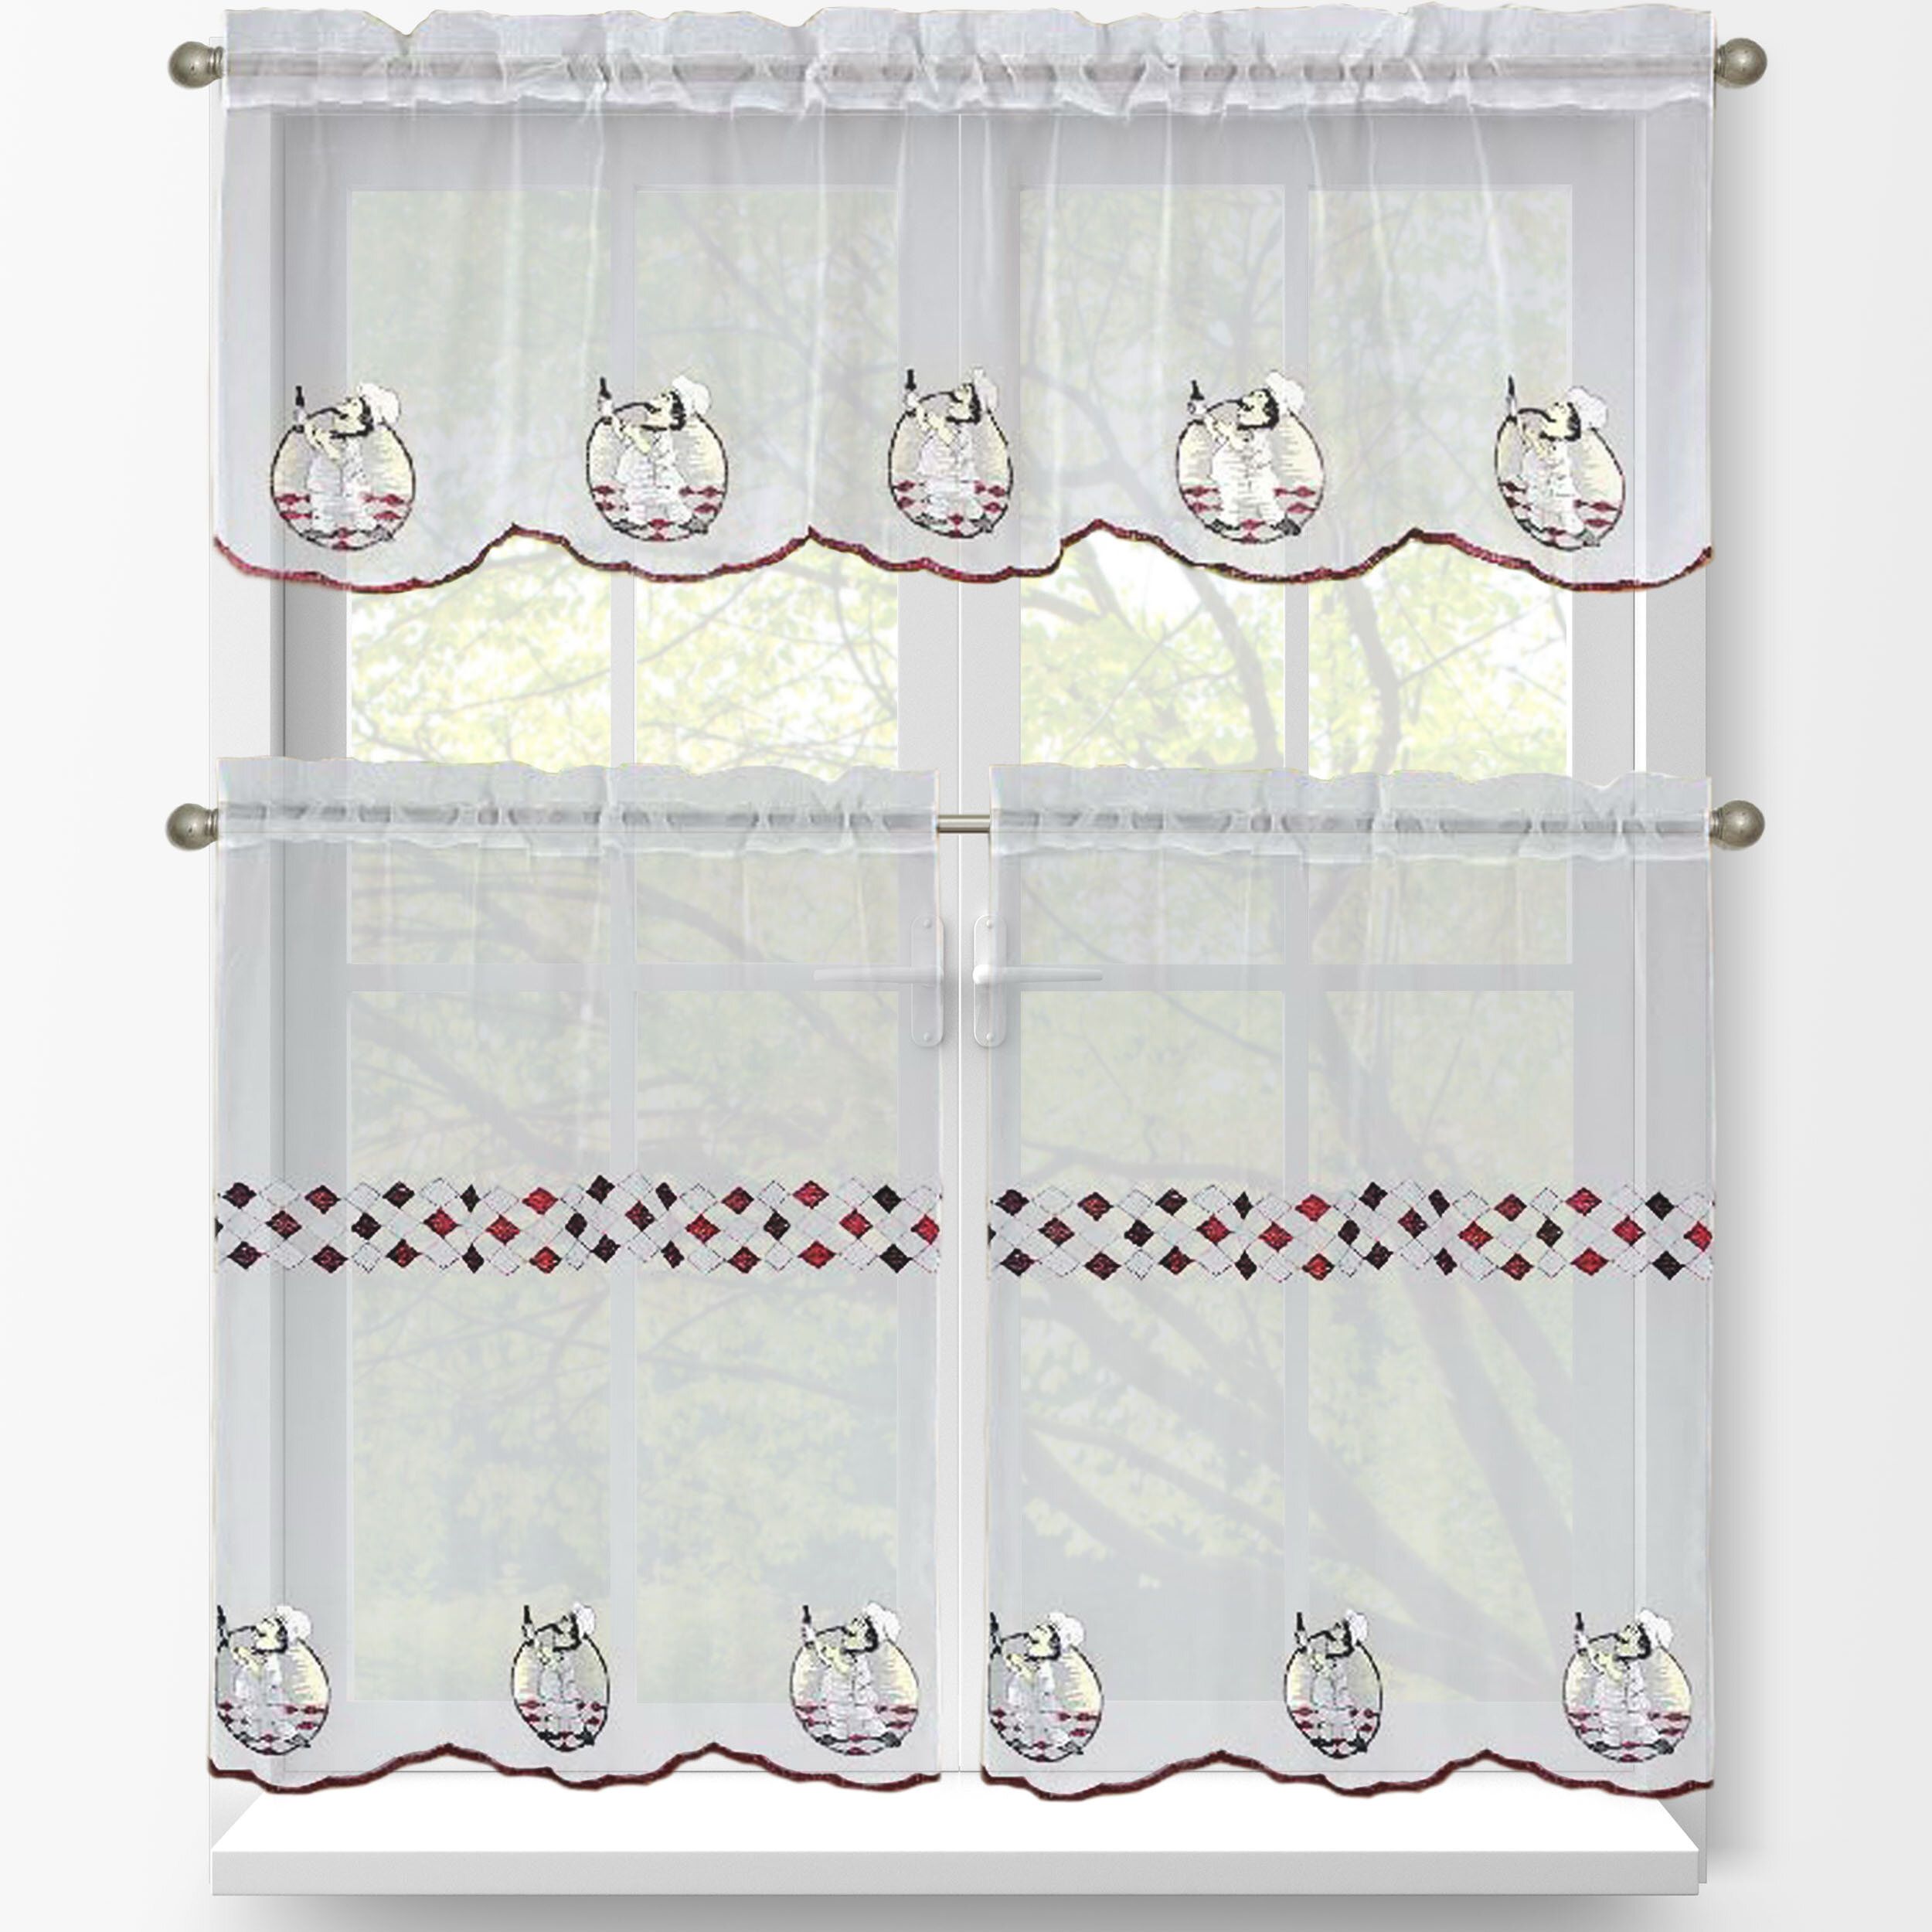 Crandon 3 Piece Embroidered Kitchen Tier And Valance Set With Urban Embroidered Tier And Valance Kitchen Curtain Tier Sets (View 17 of 20)